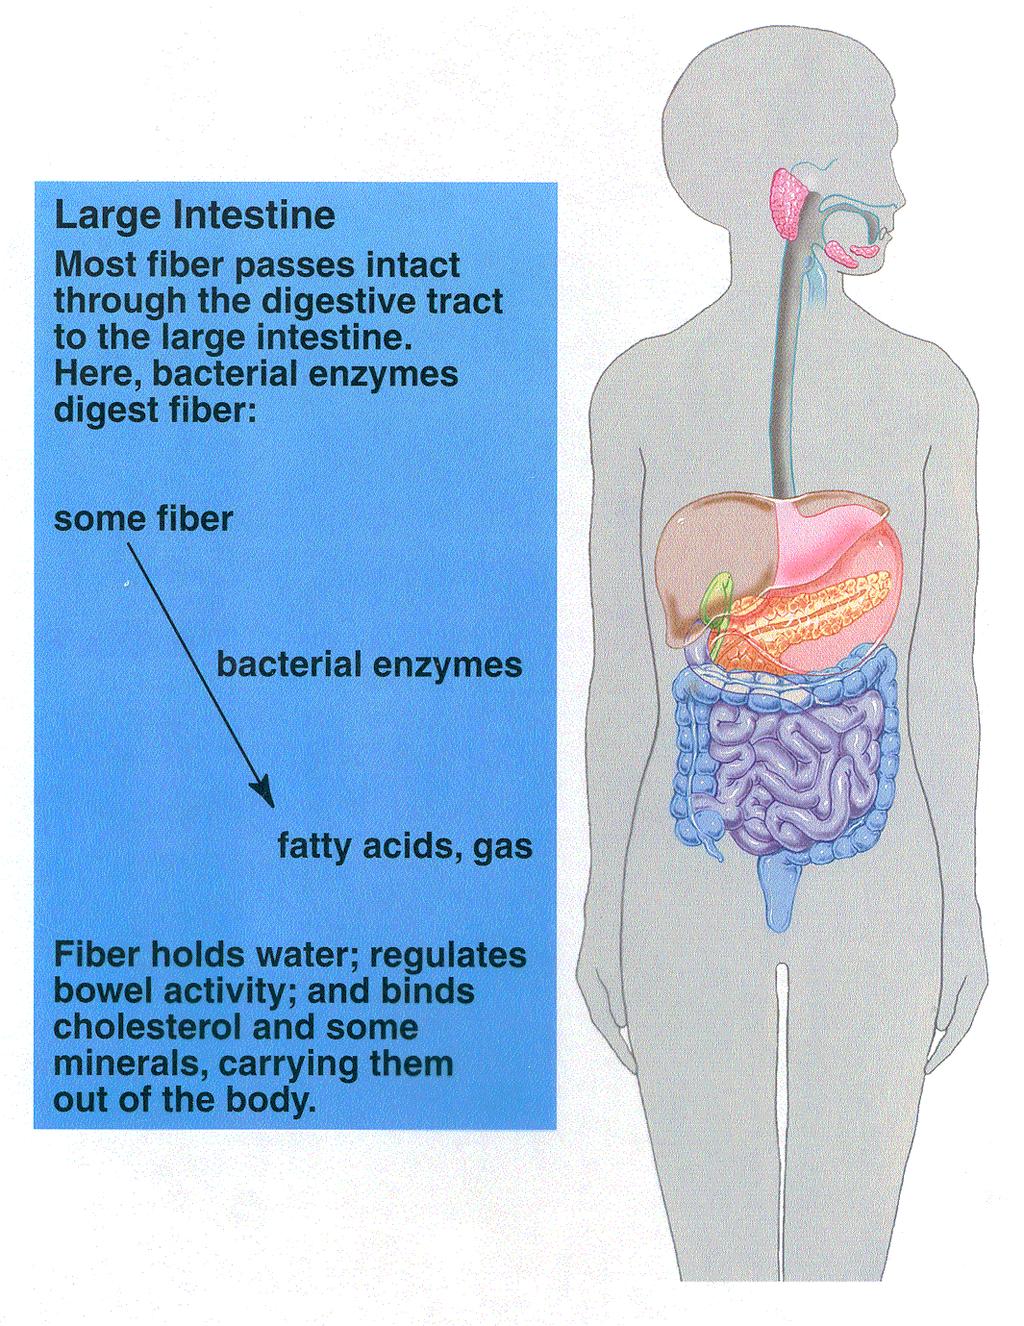 gastrointestinal (GI) tract bacteria break down fibers & resistant starch to small fat